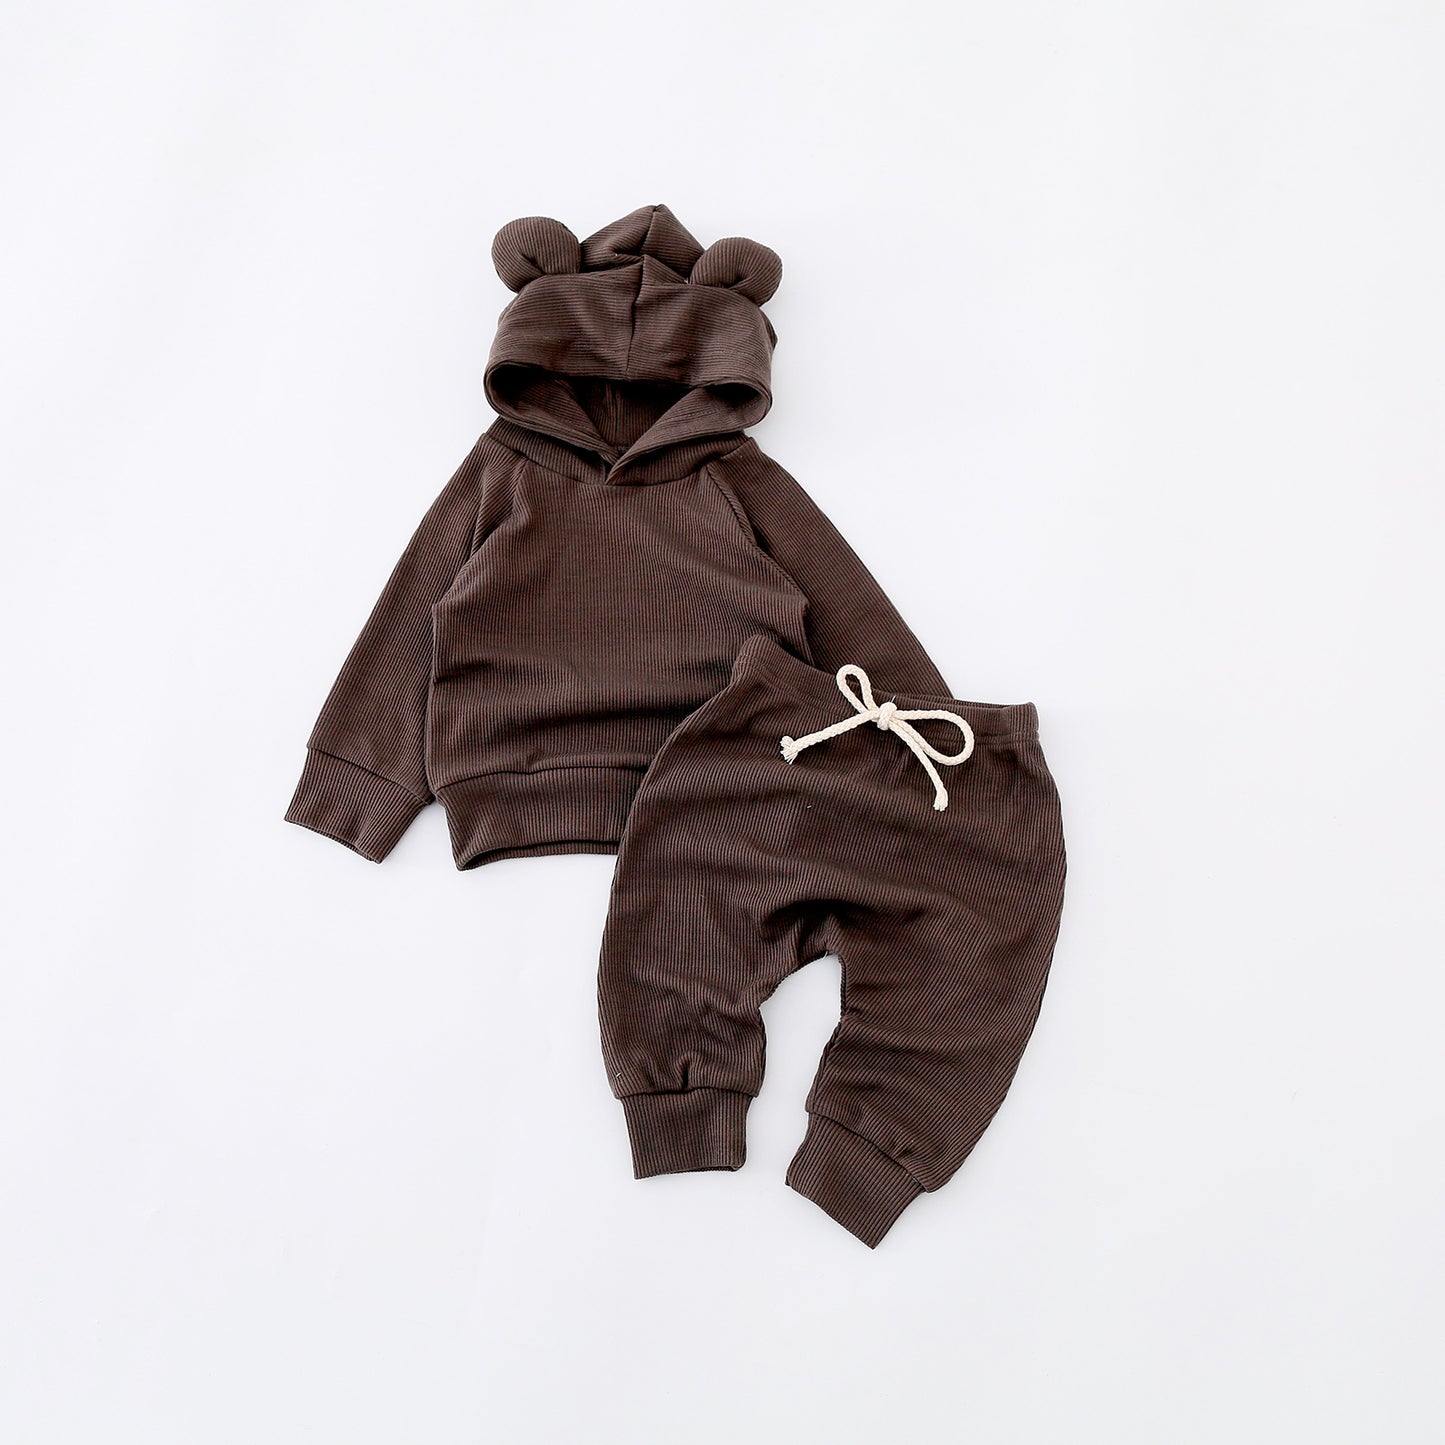 Baby unisex harem pants with pullover cat ear hooded